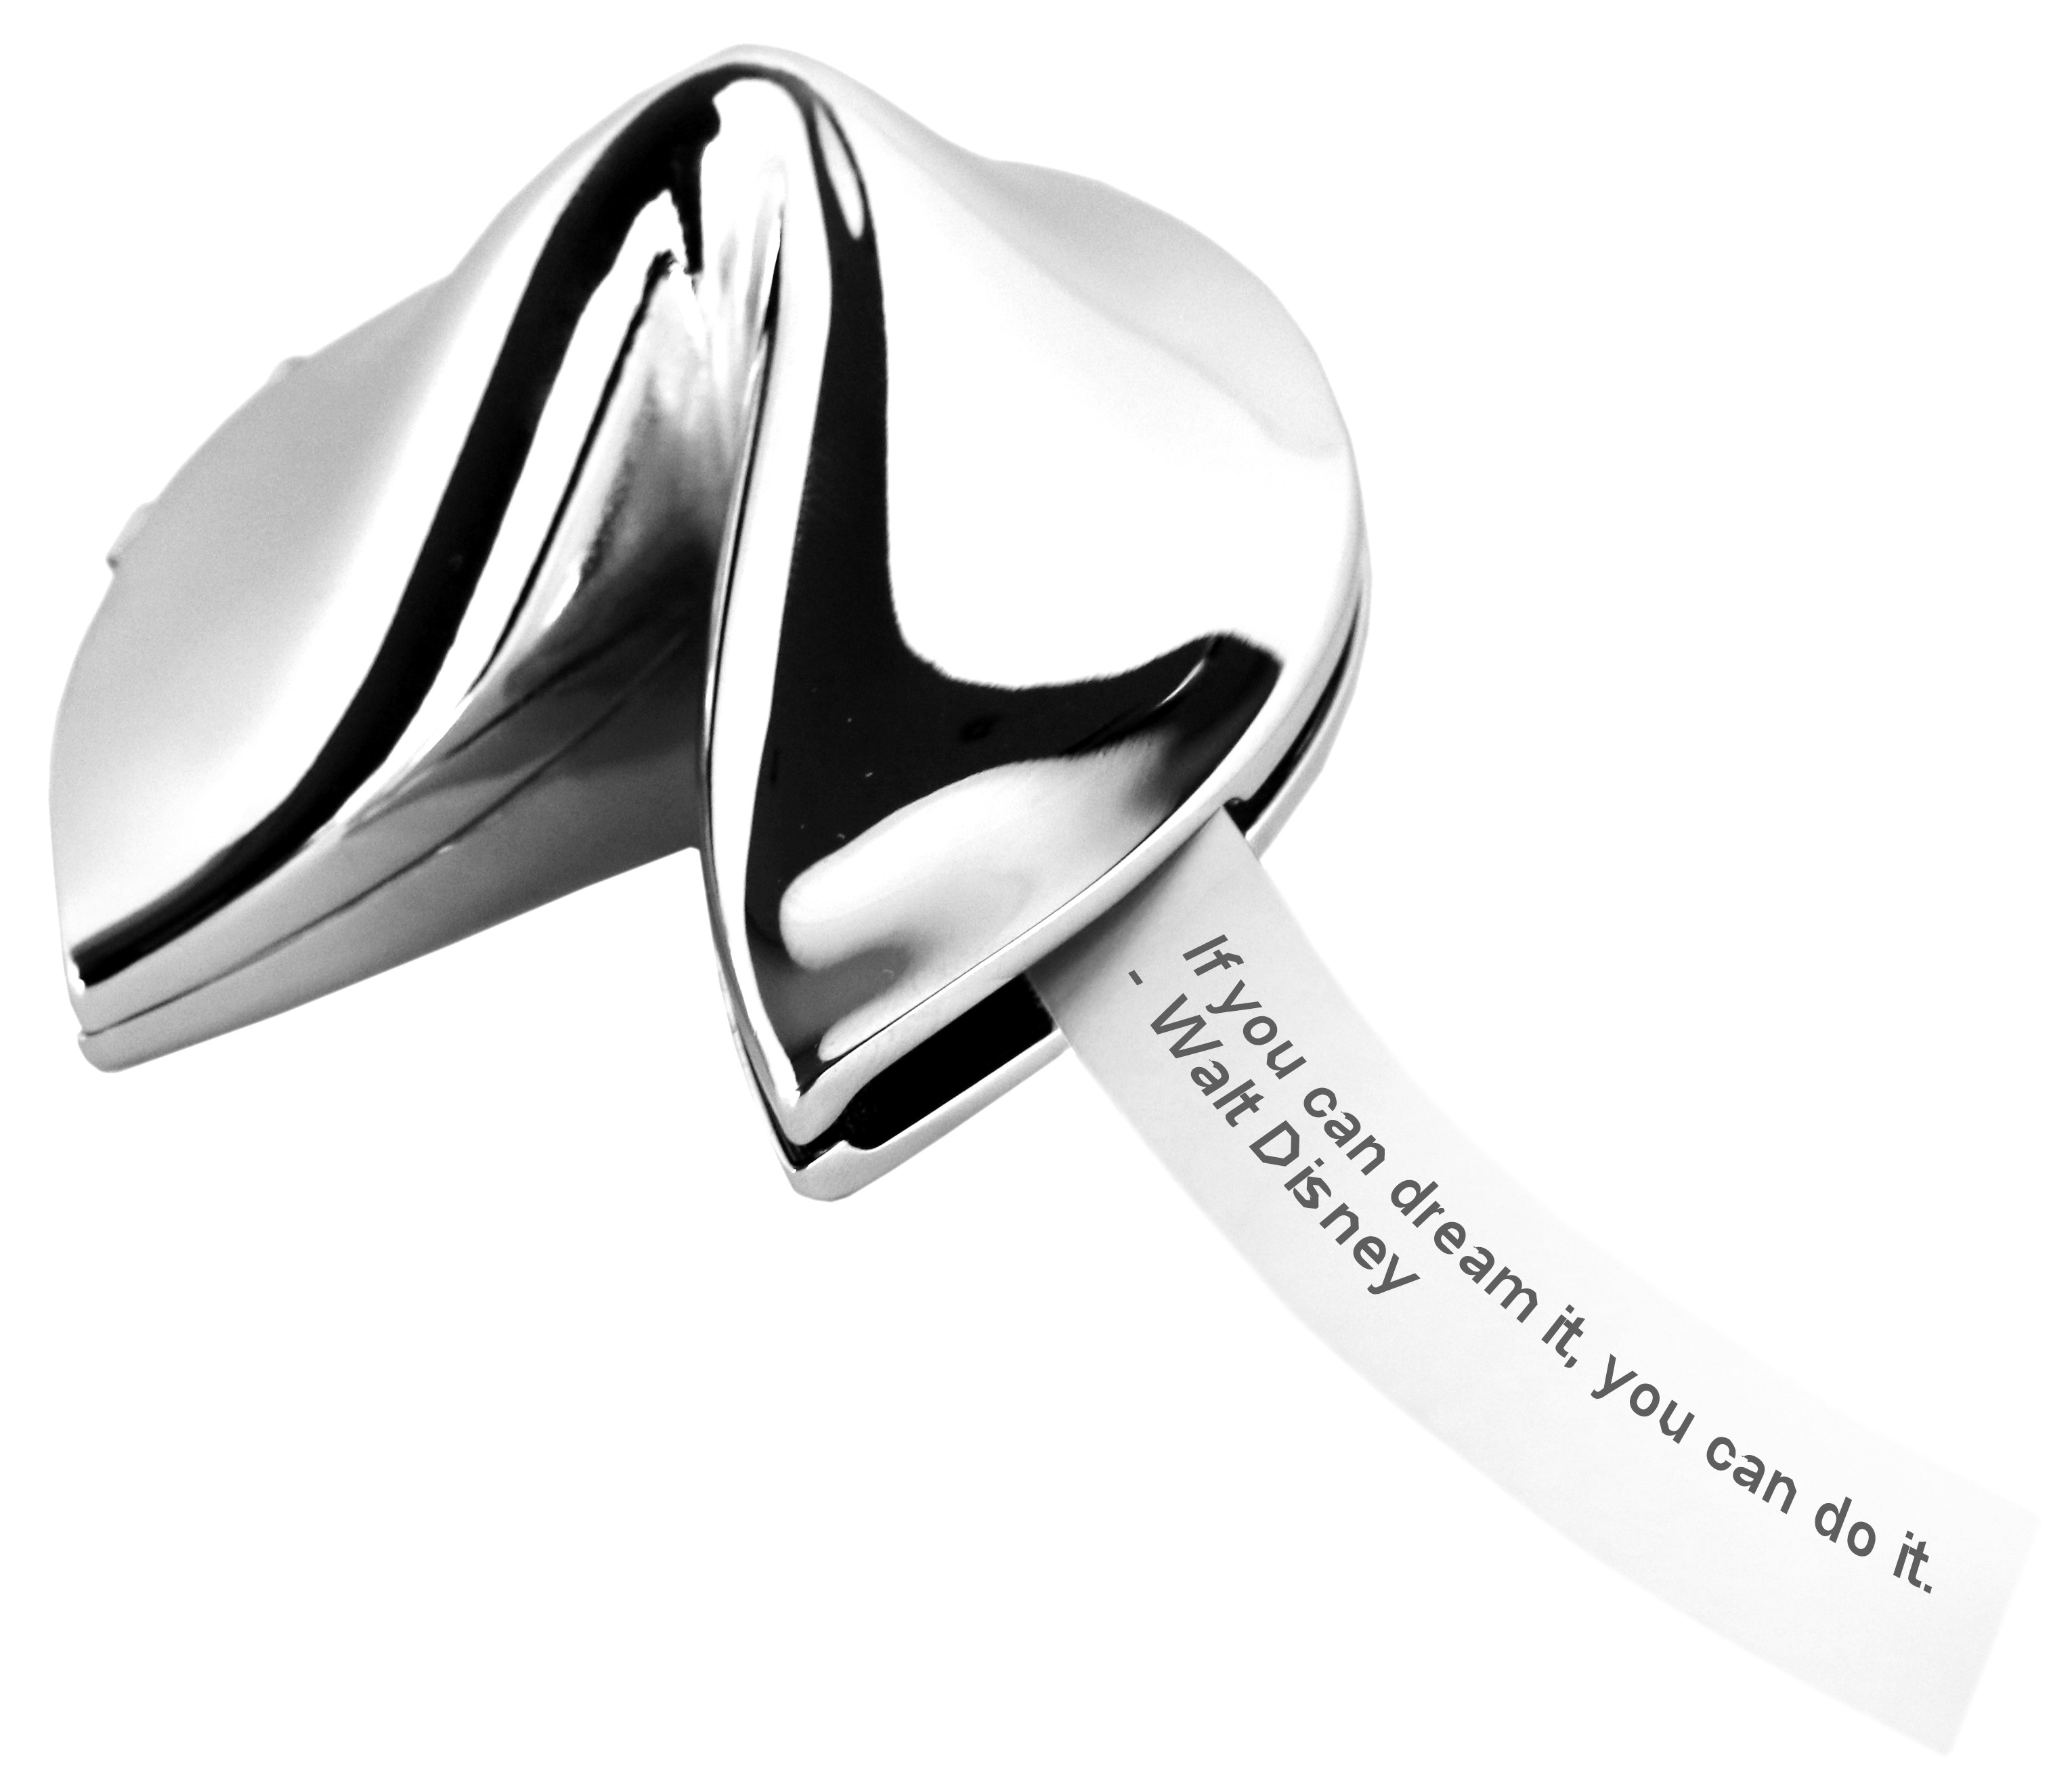 https://www.hansonellis.com/mm5/graphics/00000001/engraved-silver-chinese-fortune-cookie-asian-favors-personalized_2.jpg